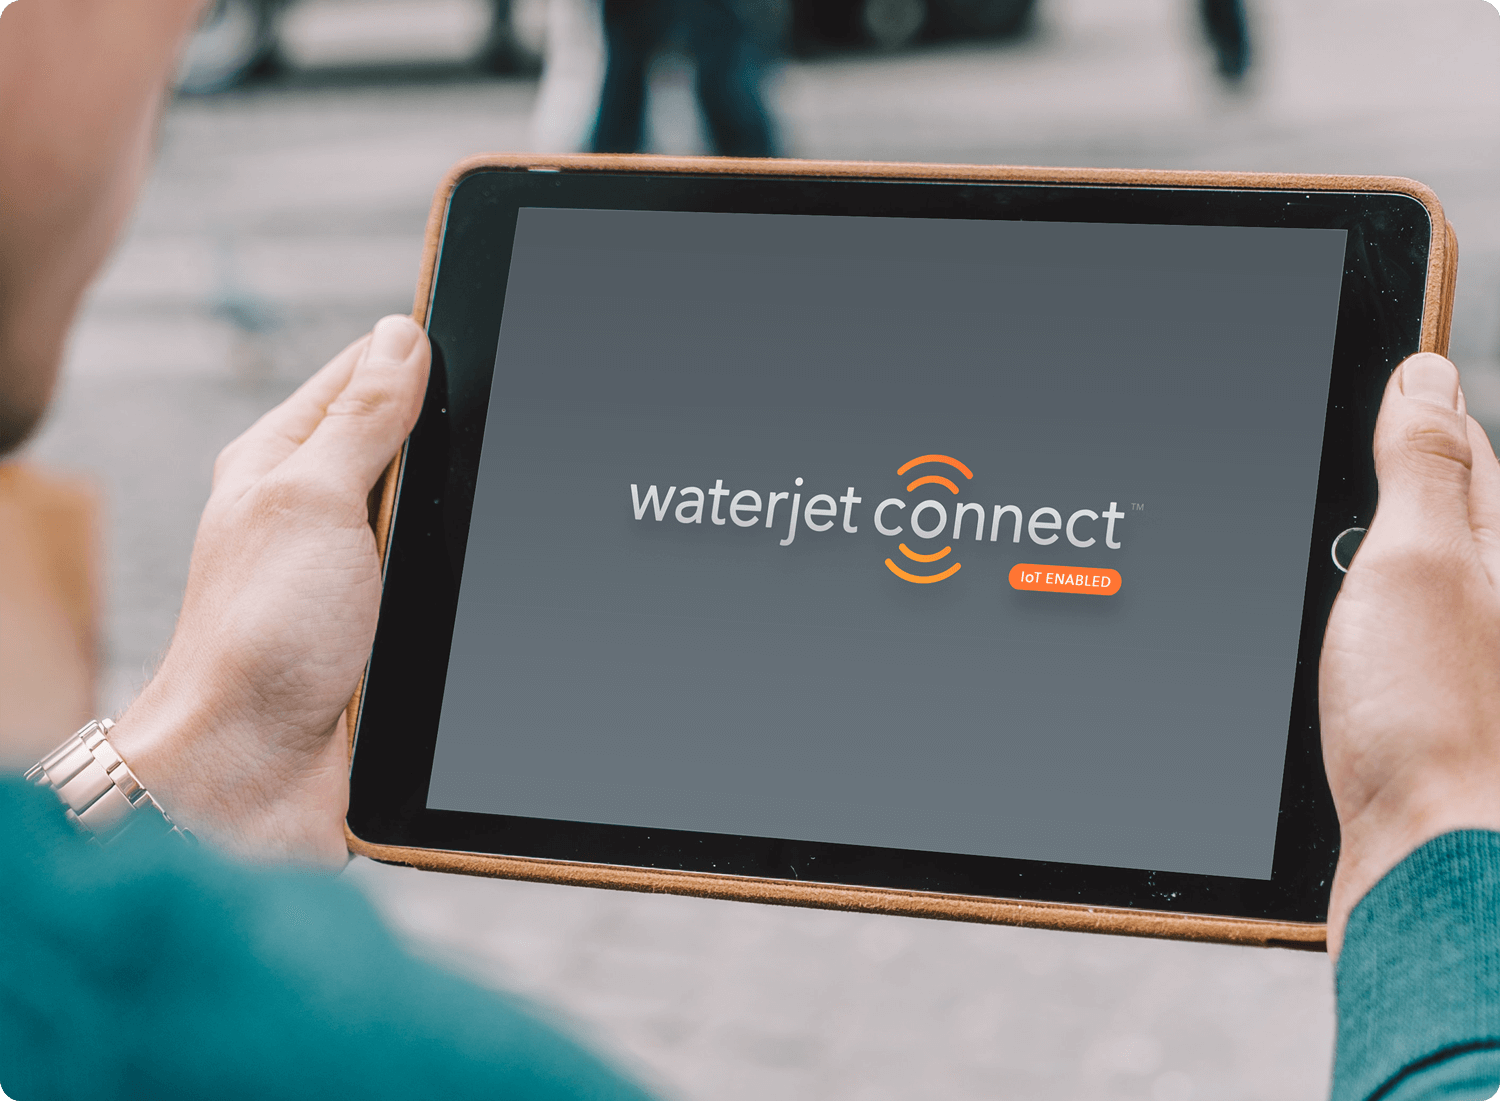 Waterjet Connect logo on an iPad screen in someones hands